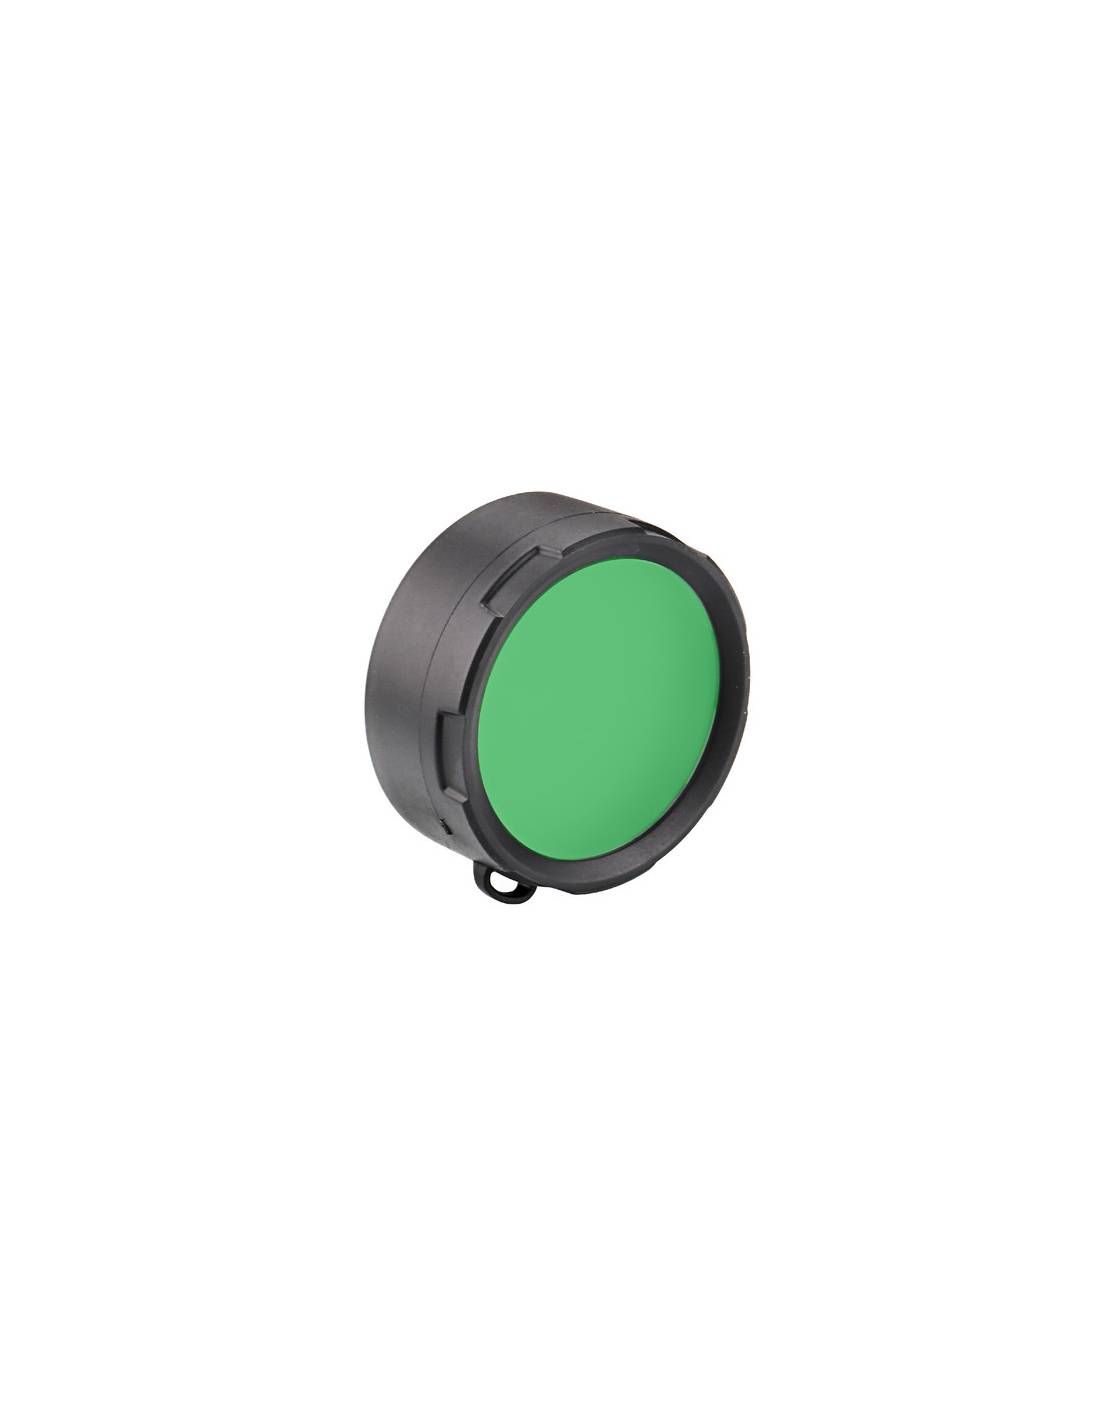 Filters for 42mm Flashlights